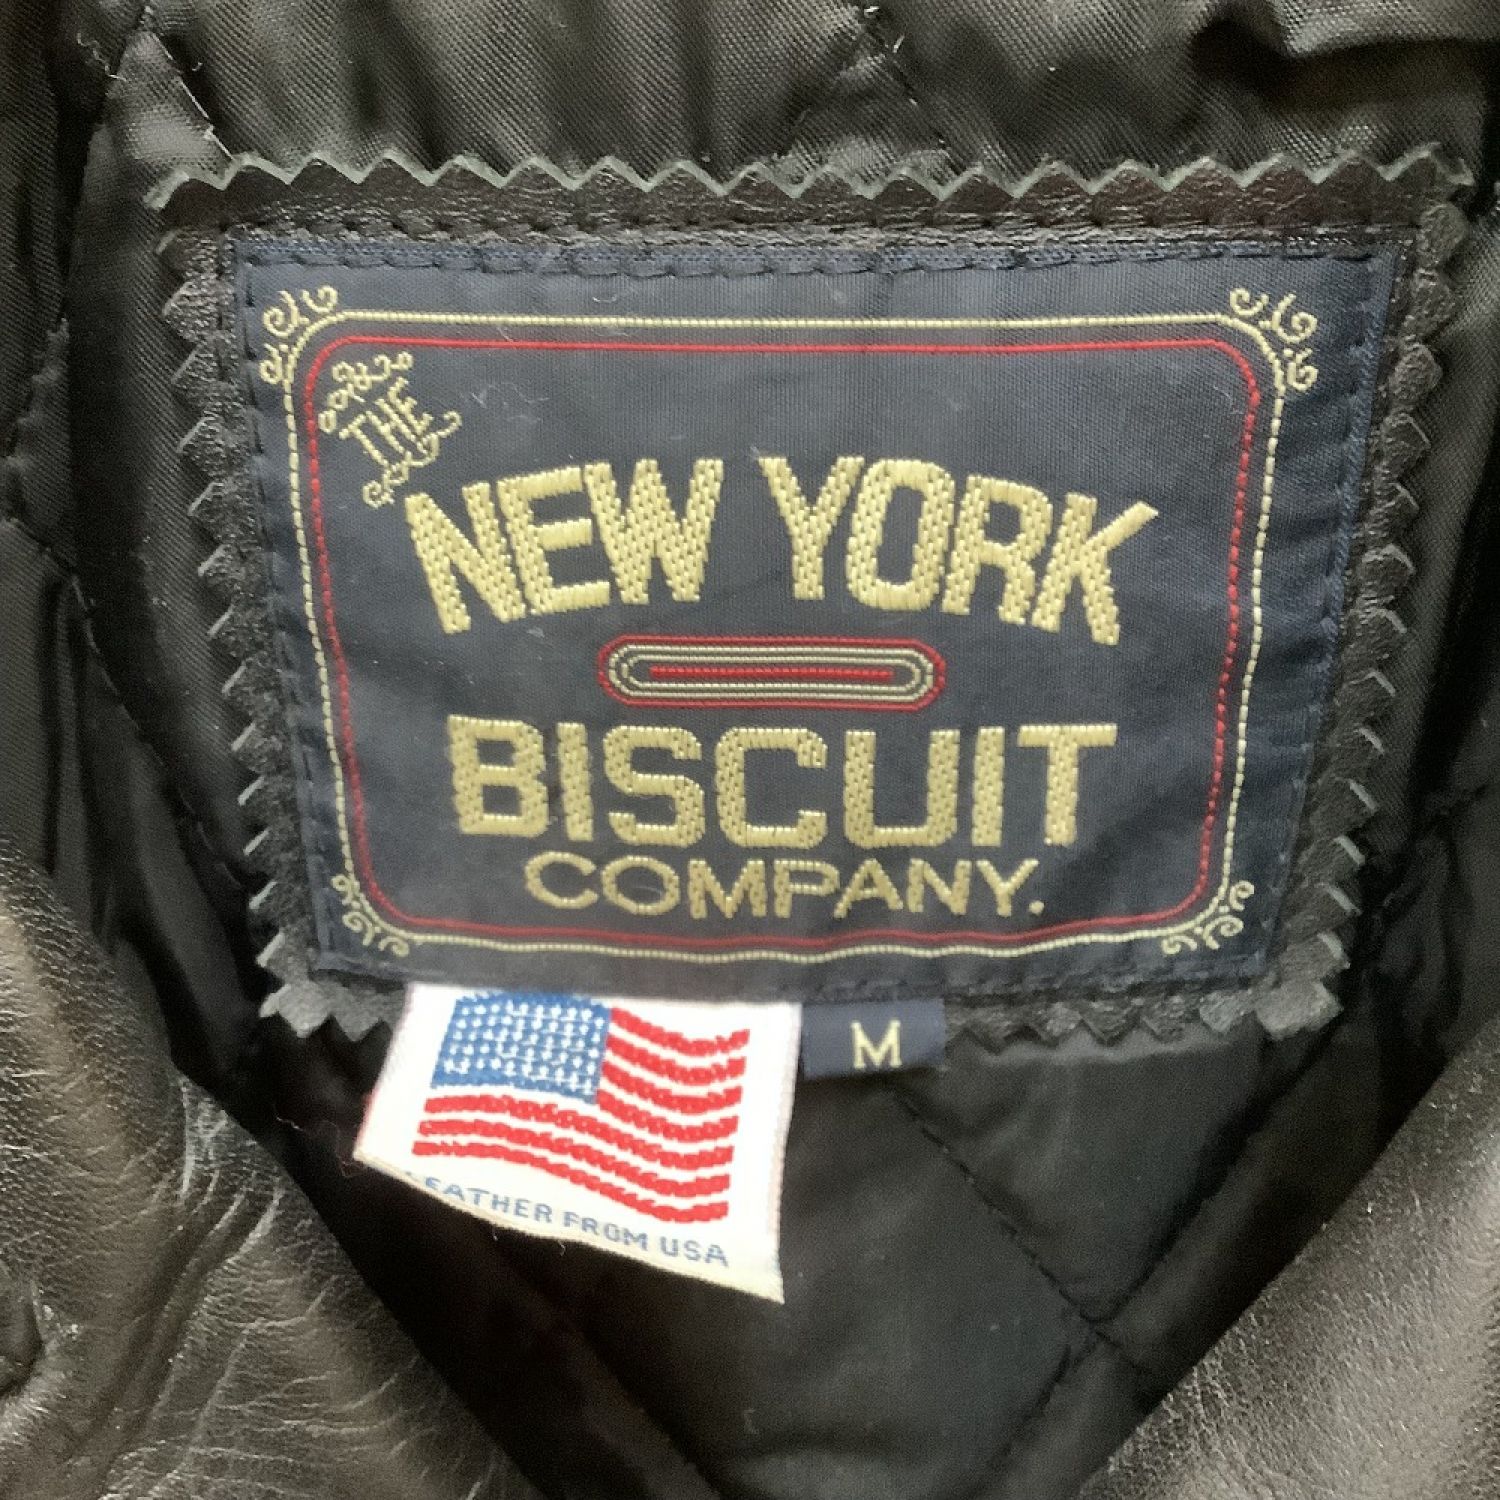 NEW YORK BISCUIT COMPANY.　ダブルライダース